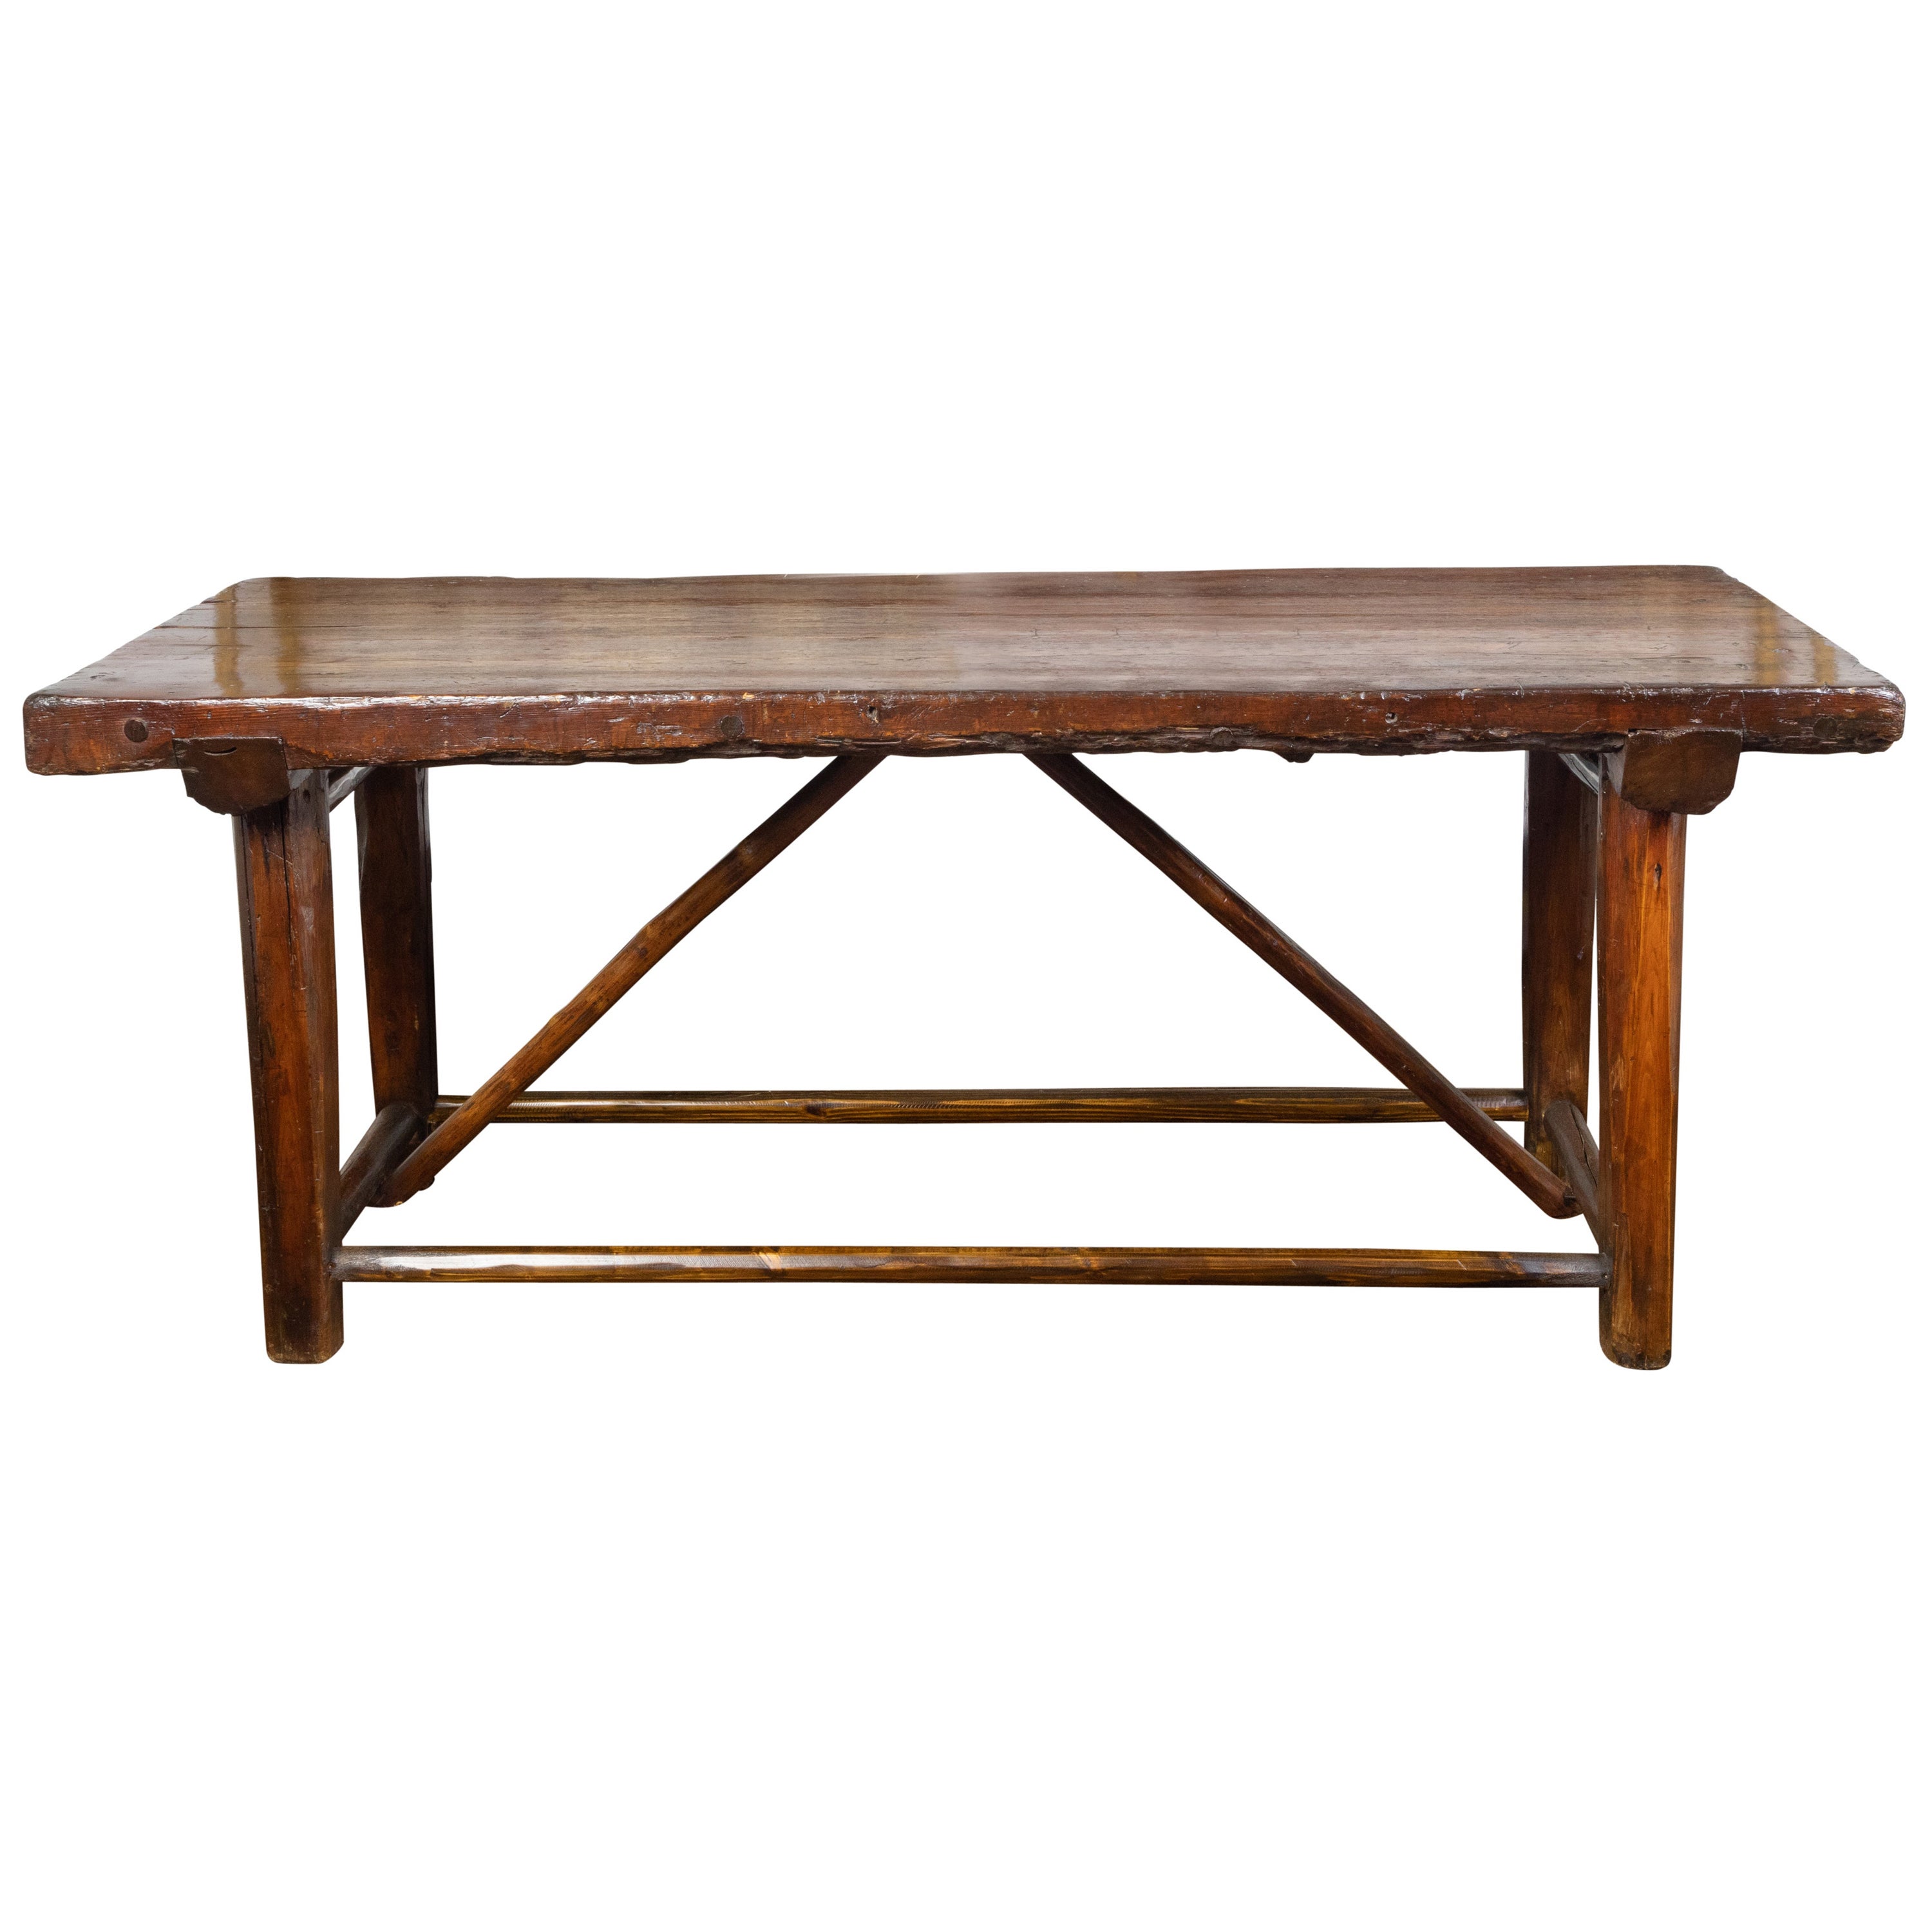 American 1900s Rustic Pine Log Table with Straight Legs and Side Stretchers For Sale